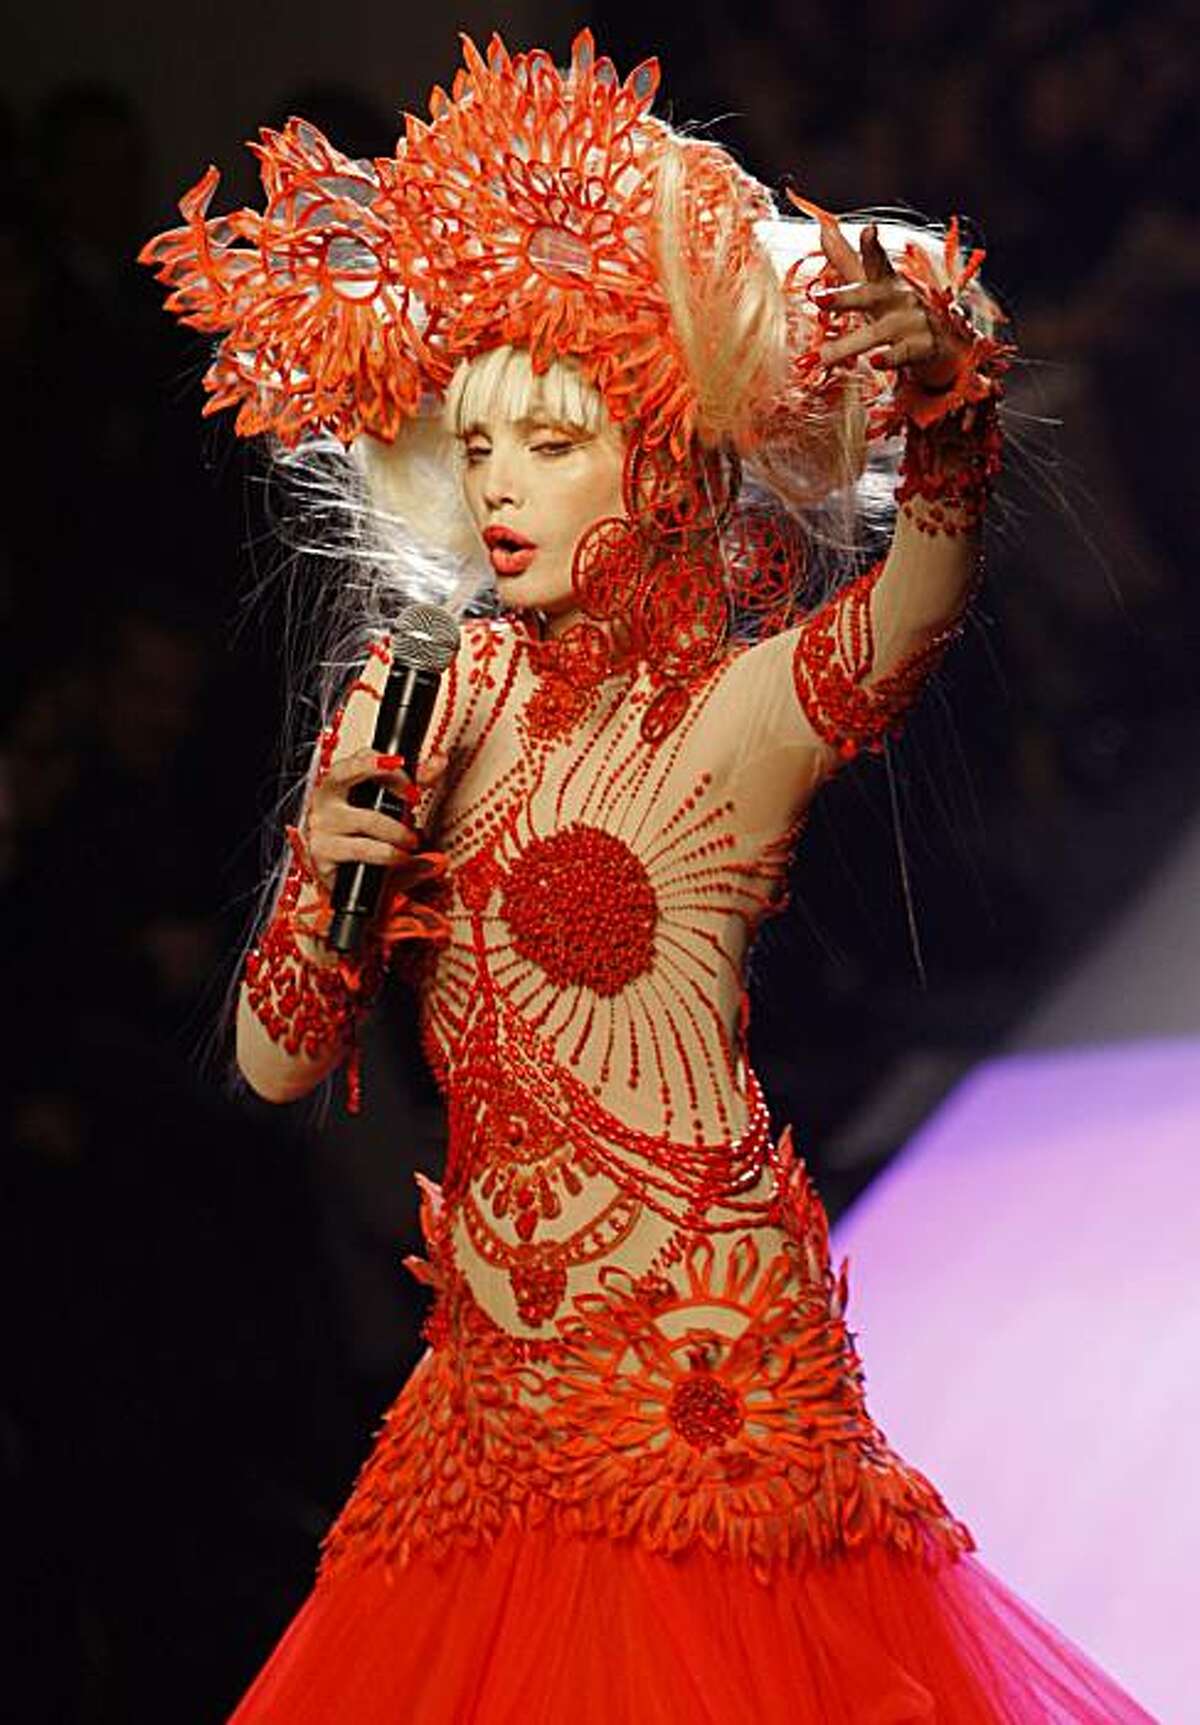 French actress Arielle Dombasle presents a creation by French designer Jean-Paul Gaultier as part of his Haute Couture Spring Summer 2010 fashion collection in Paris, Wednesday, Jan. 27, 2010.